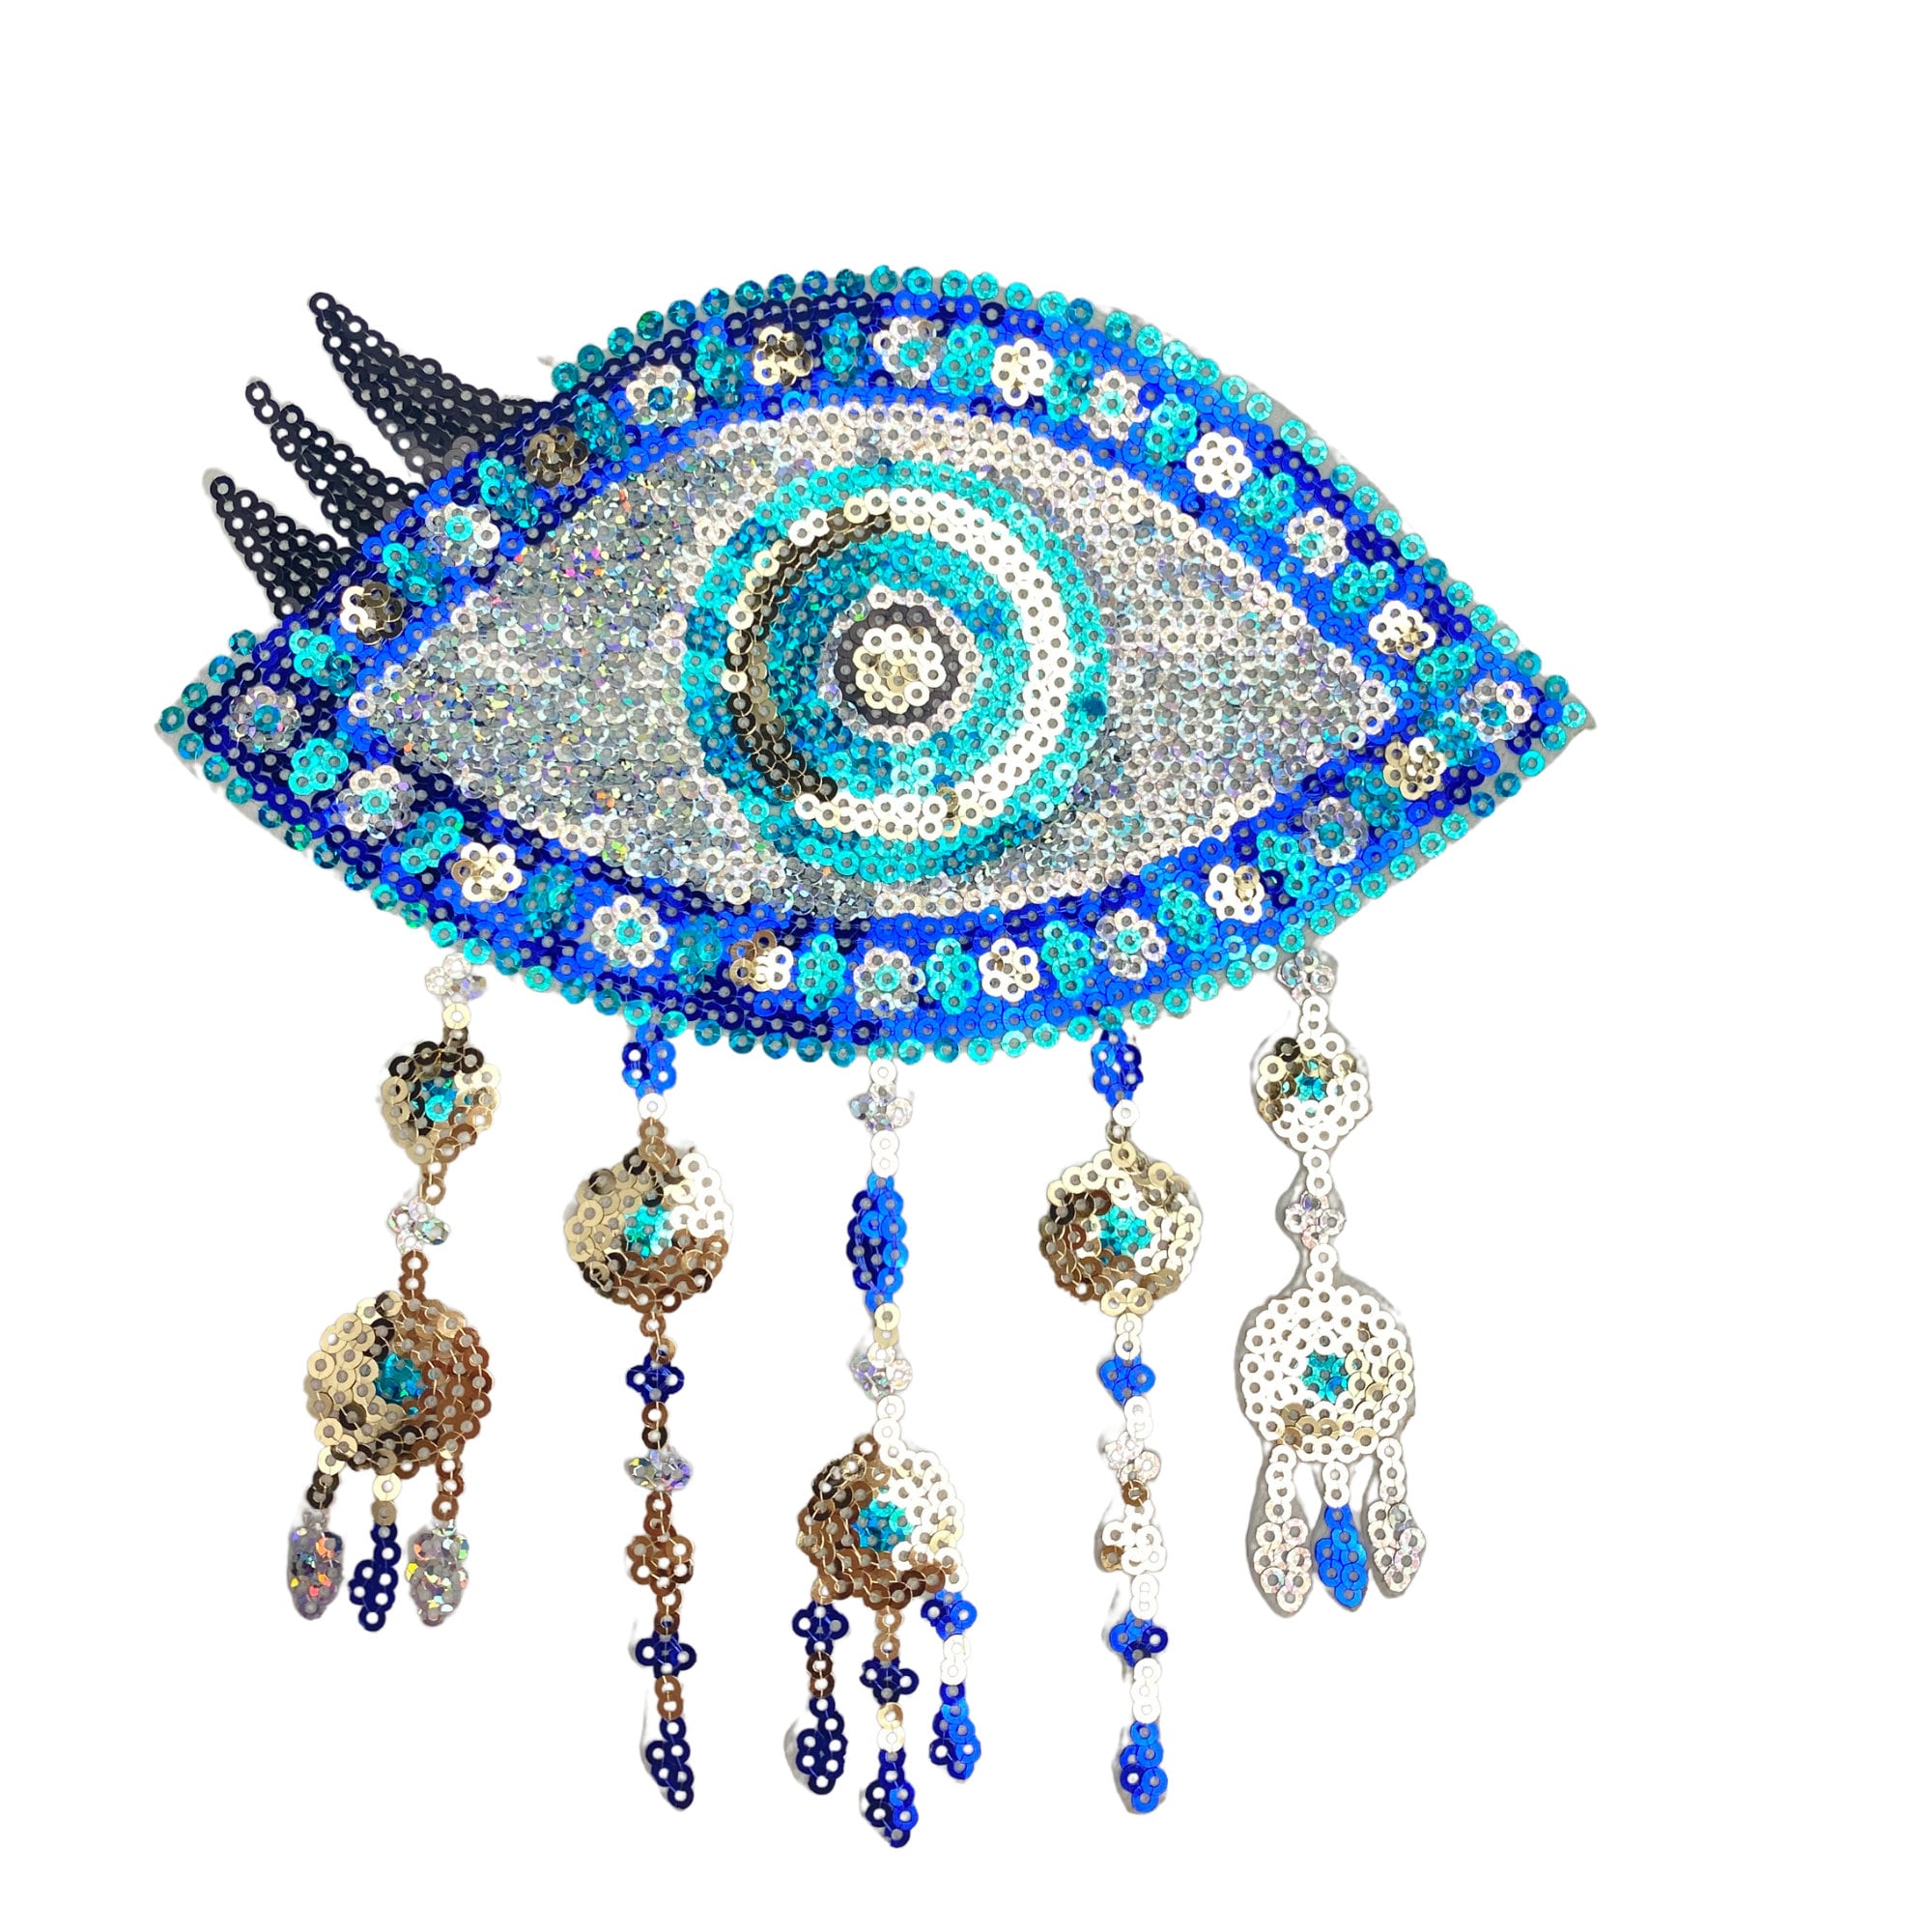 Clothing & Accessories :: Clothing Accessories :: Patches & Pins :: Evil  Eye Patch, Large Sequin Iron On Patch, Blue Eye with Gold Eyelash,  Embroidered Sew On, Glue On Patches, Sequin Applique Patches